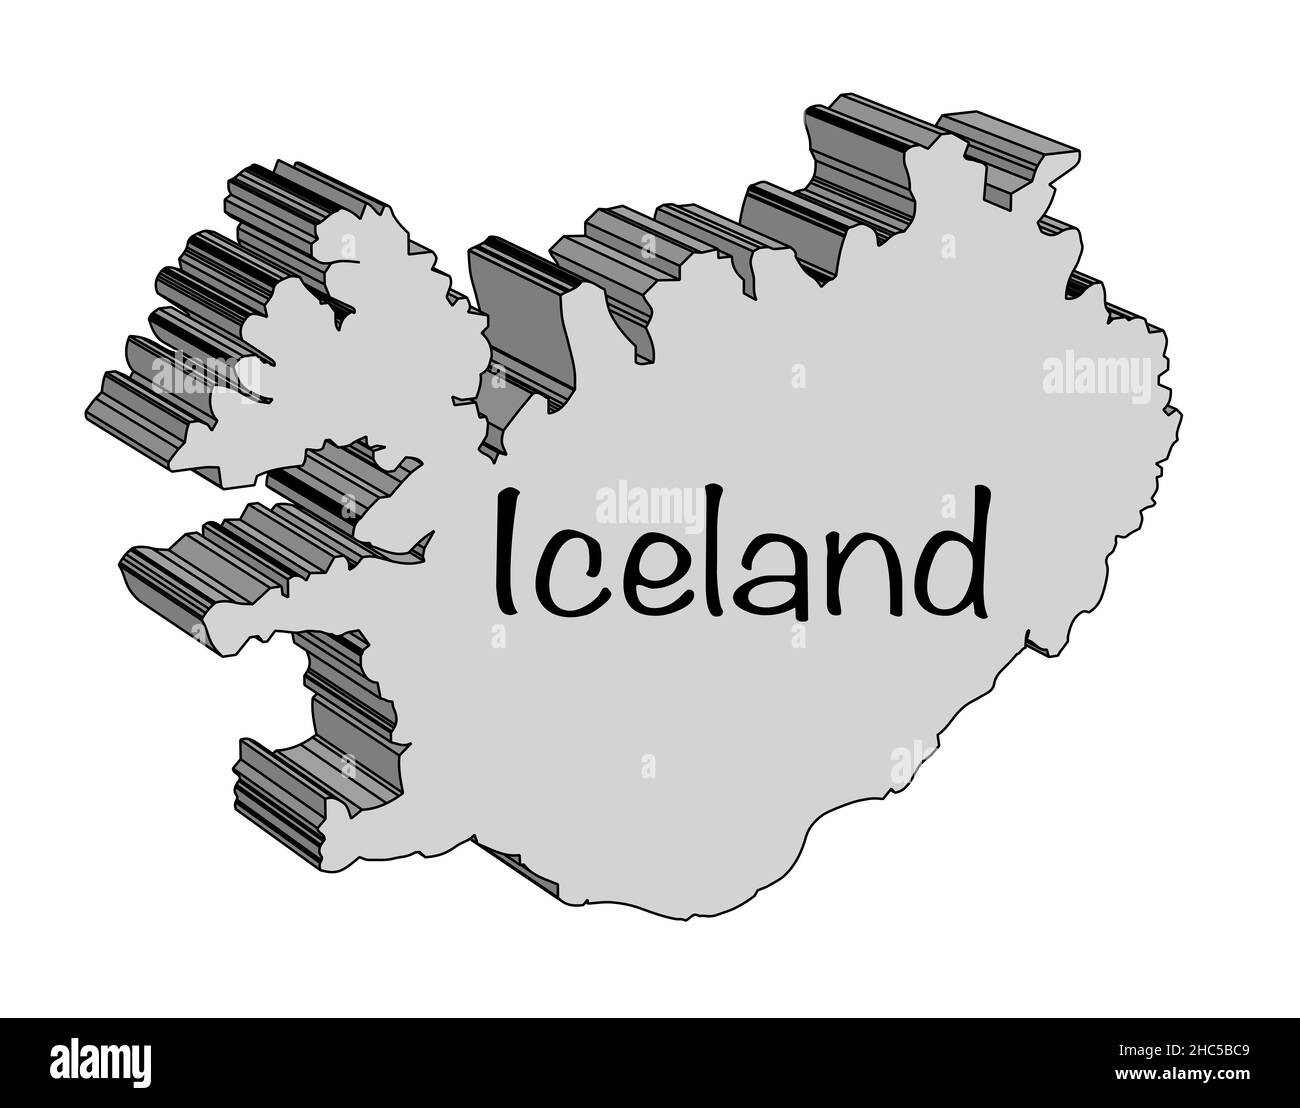 Outline 3D map of Iceland over a white background Stock Photo